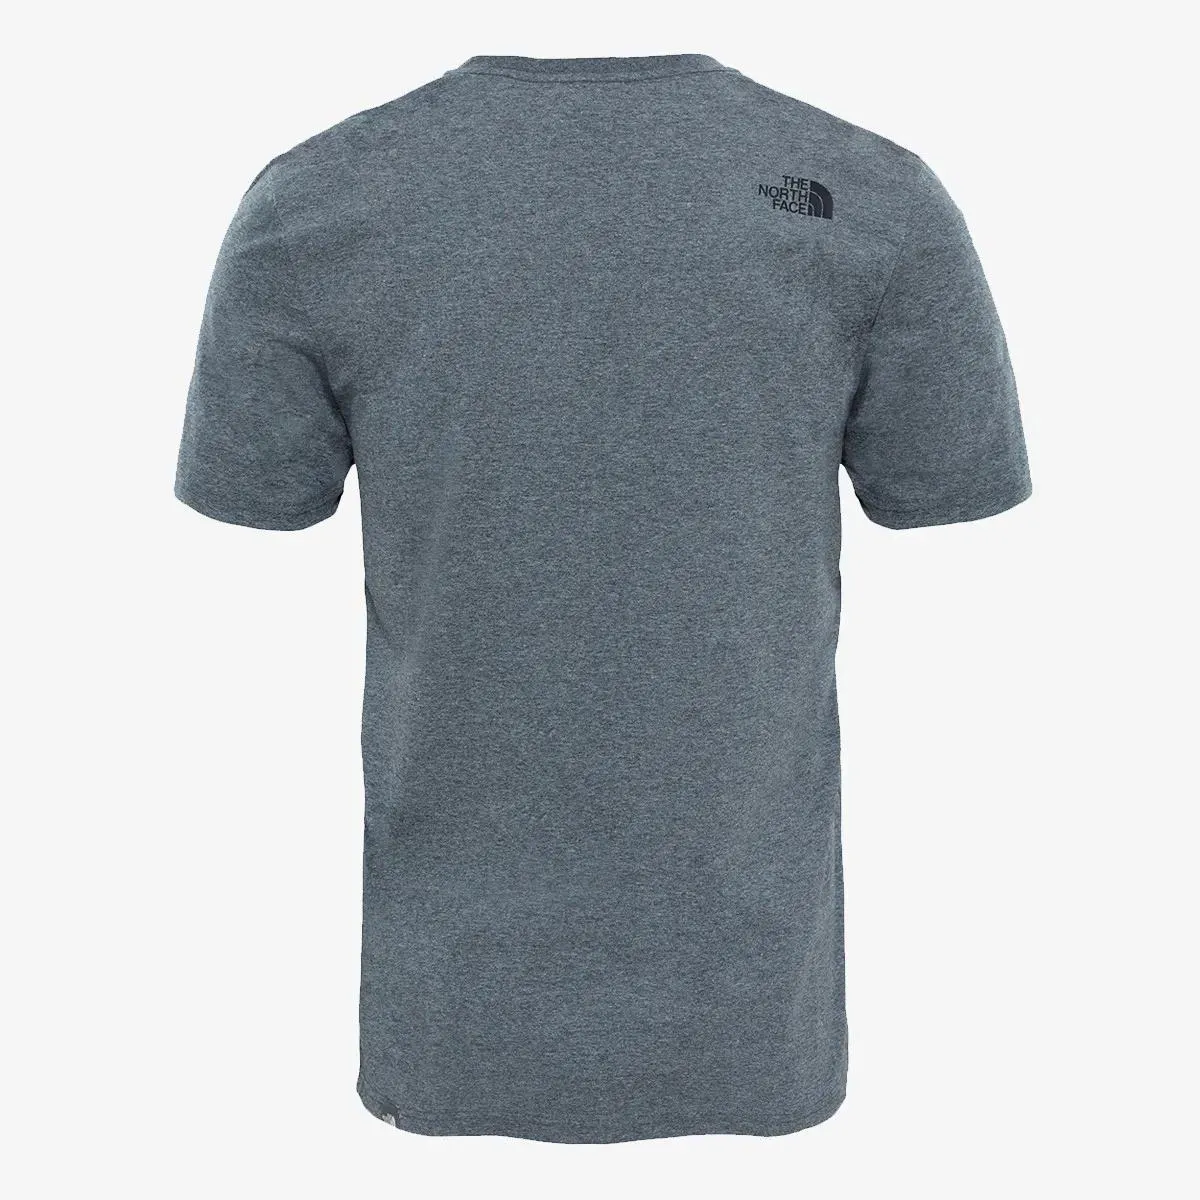 The North Face T-shirt M S/S EASY TEE TNFMDGYHTR(STD) 